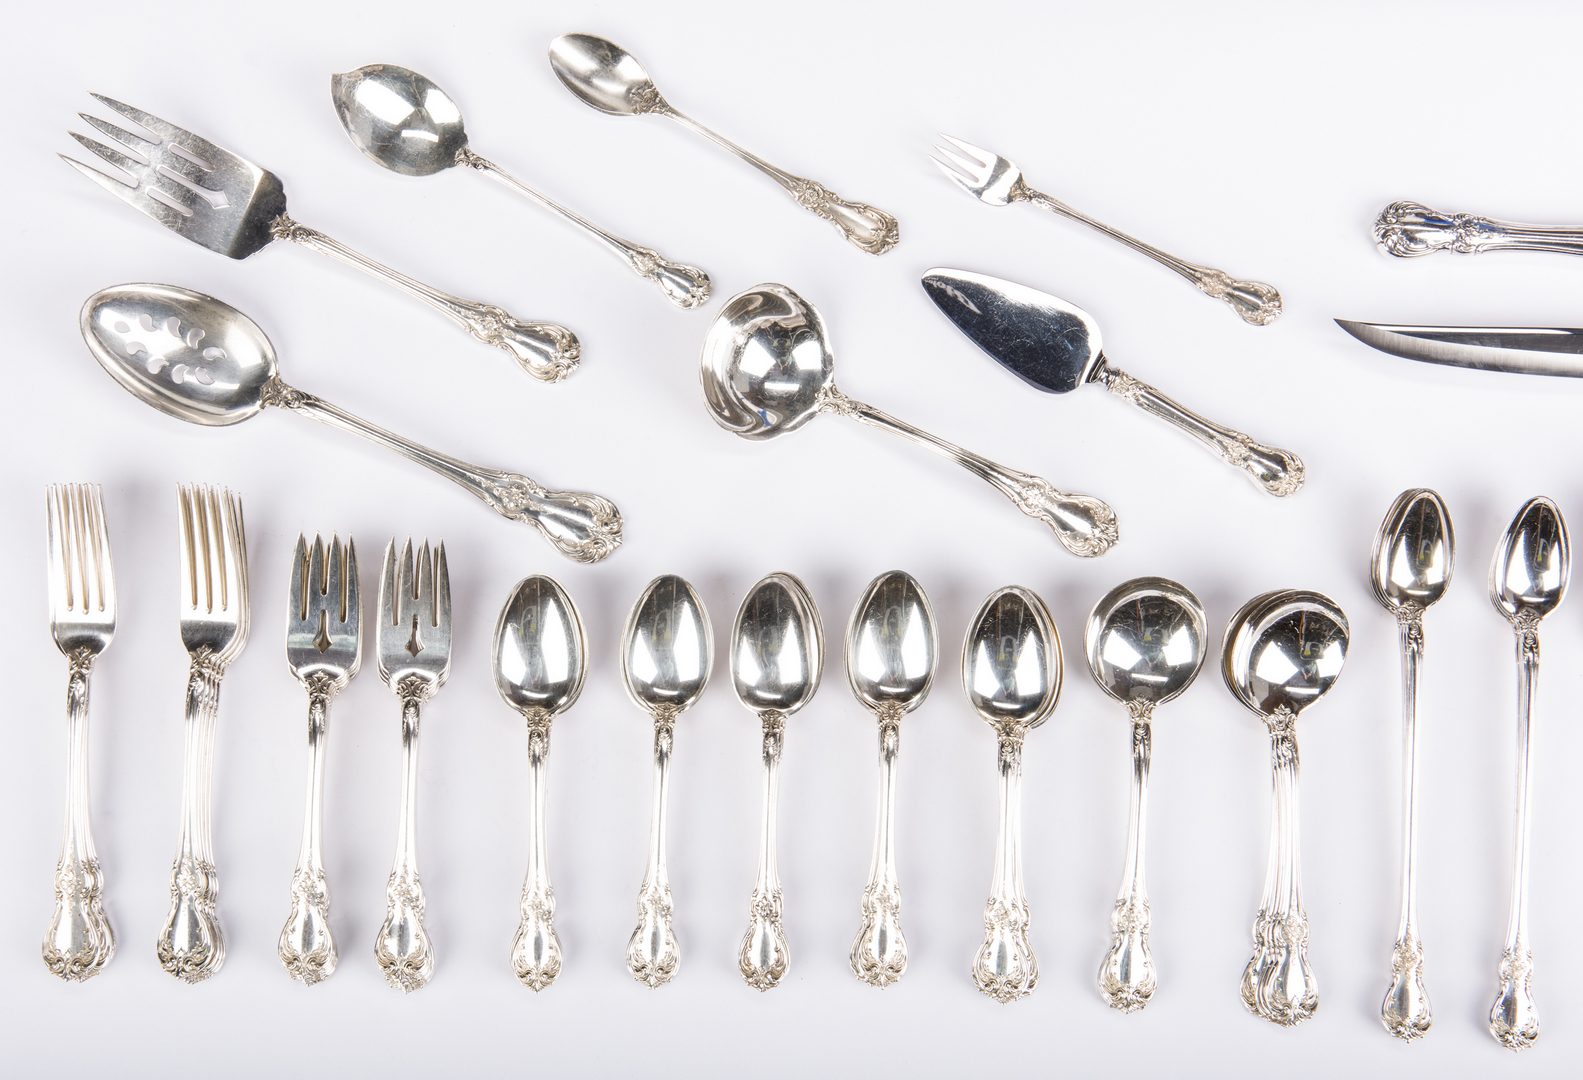 Lot 298: 80 Piece Towle Old Master Sterling Flatware